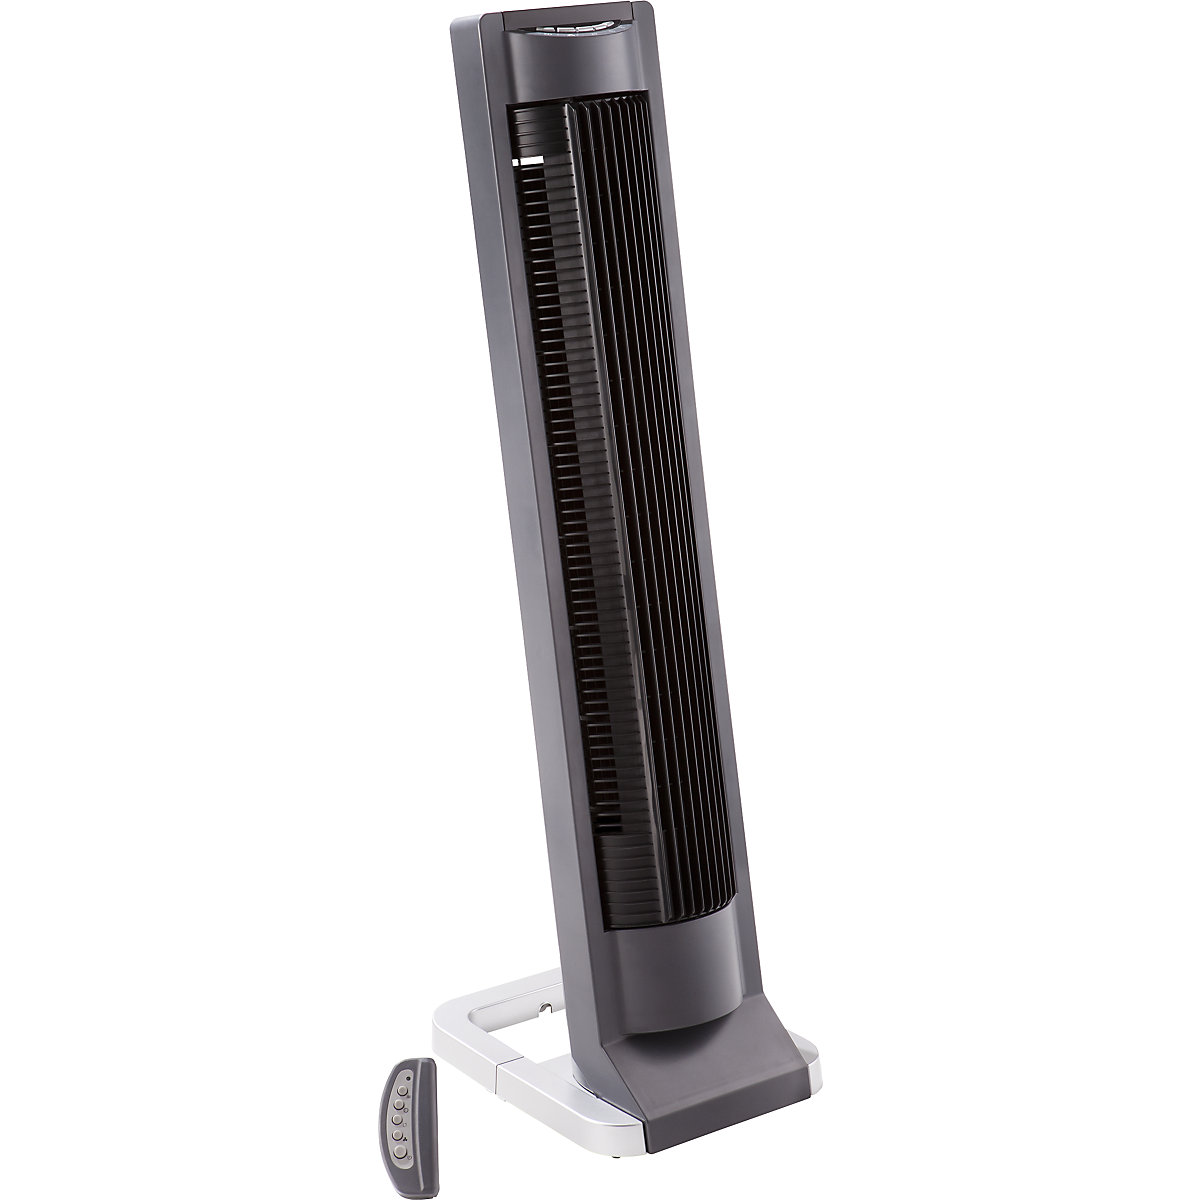 Pedestal fan with infrared remote control